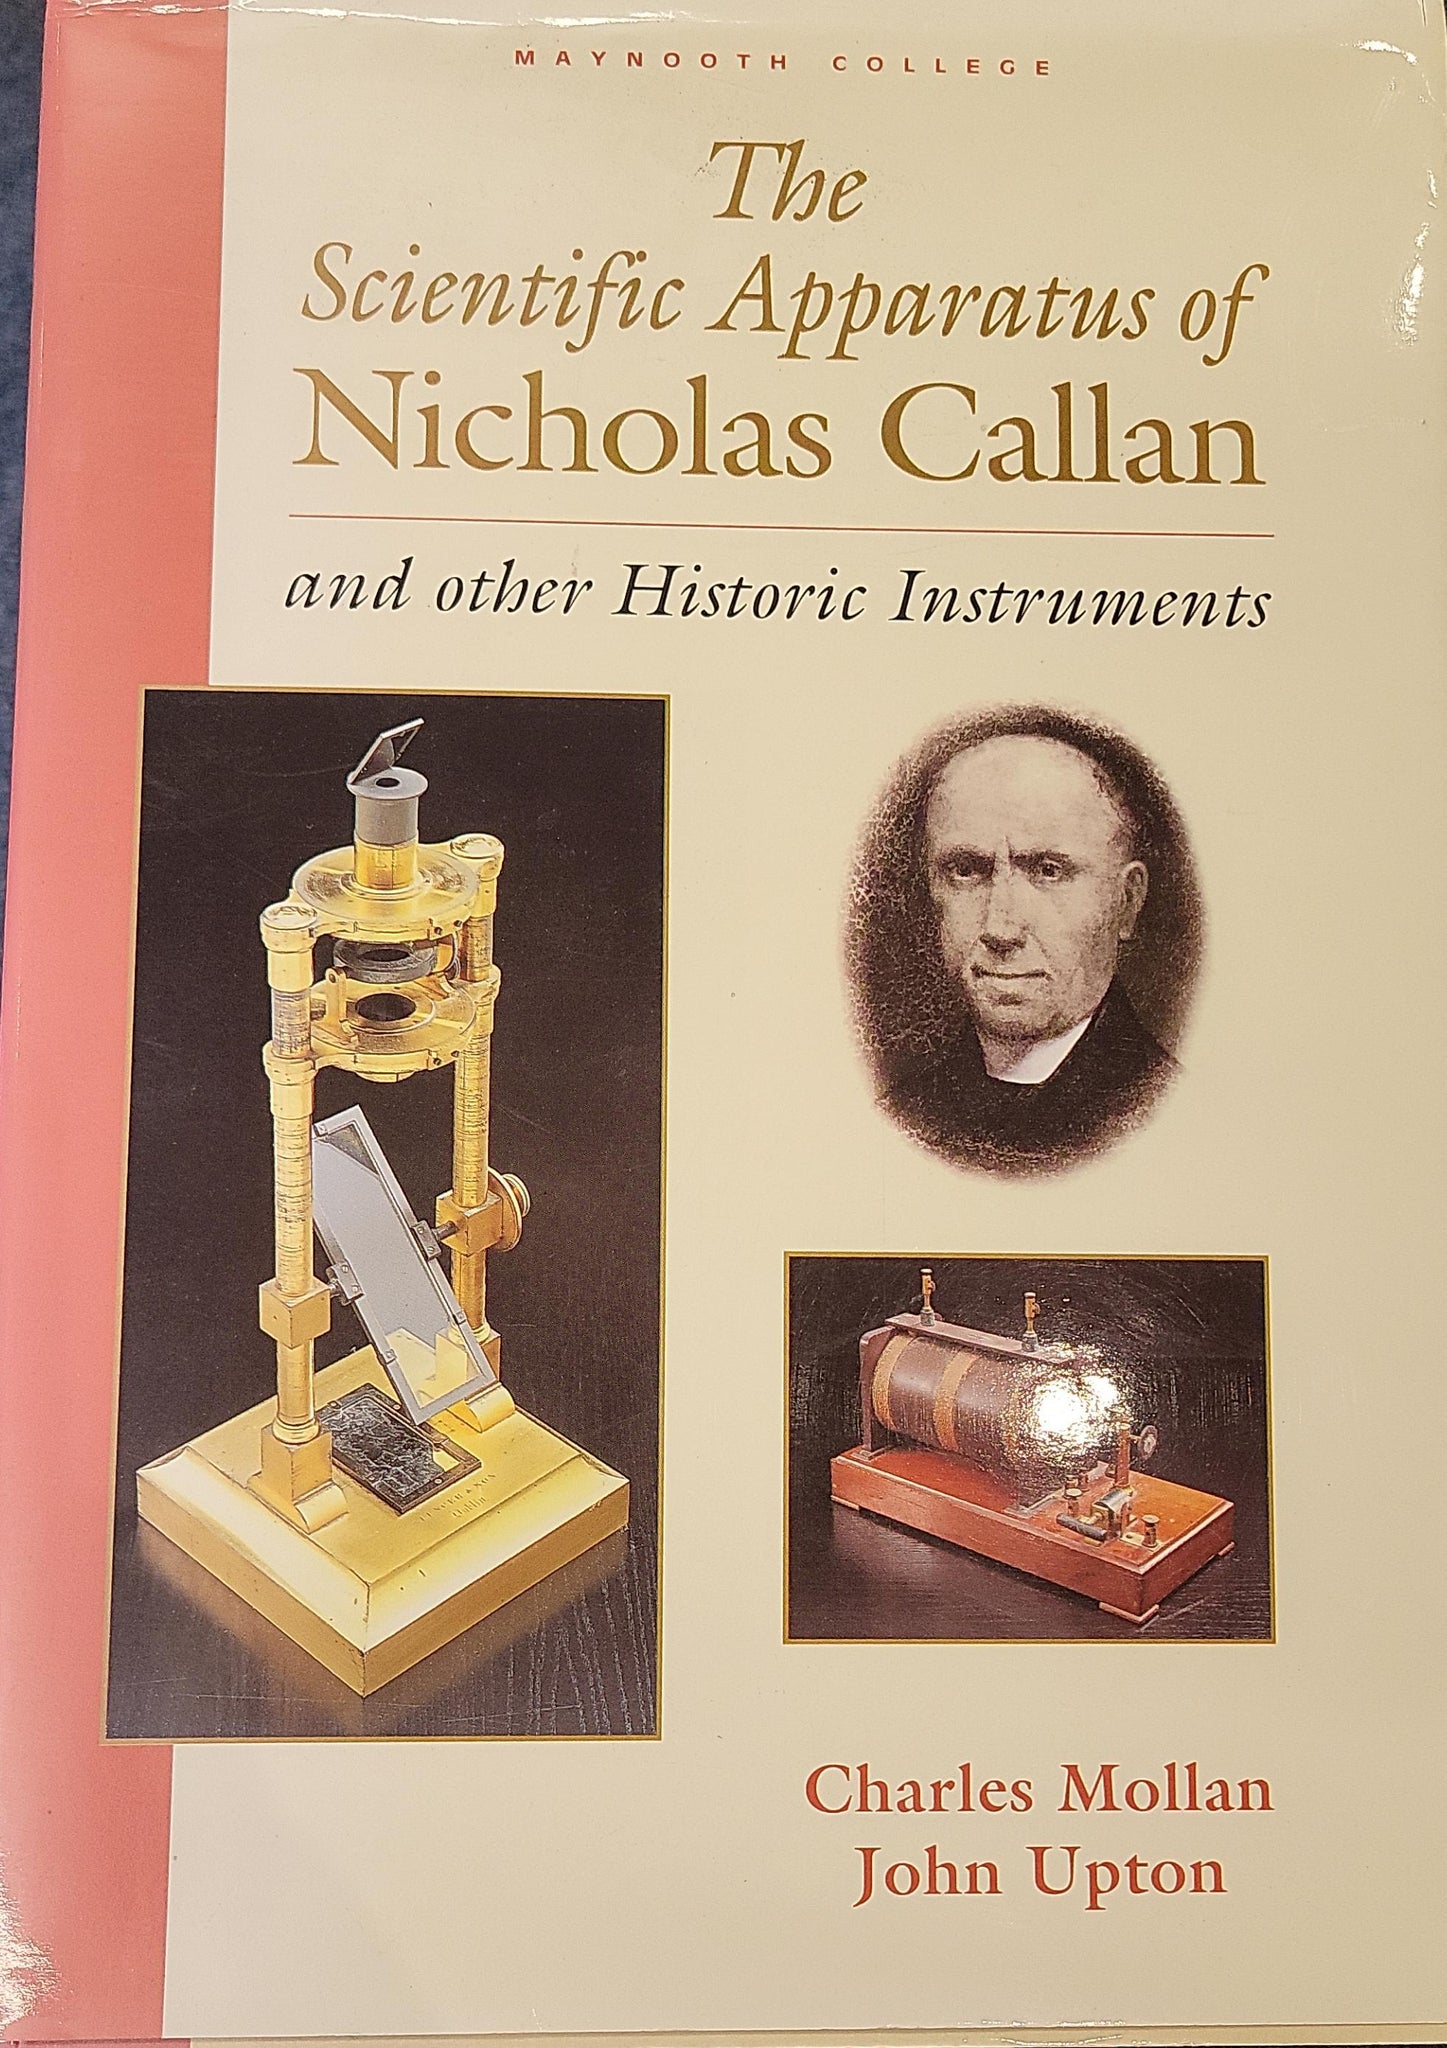 The Scientific Apparatus of Nicholas Callan, and other Historic Instruments, by Charles Mollan / John Upton